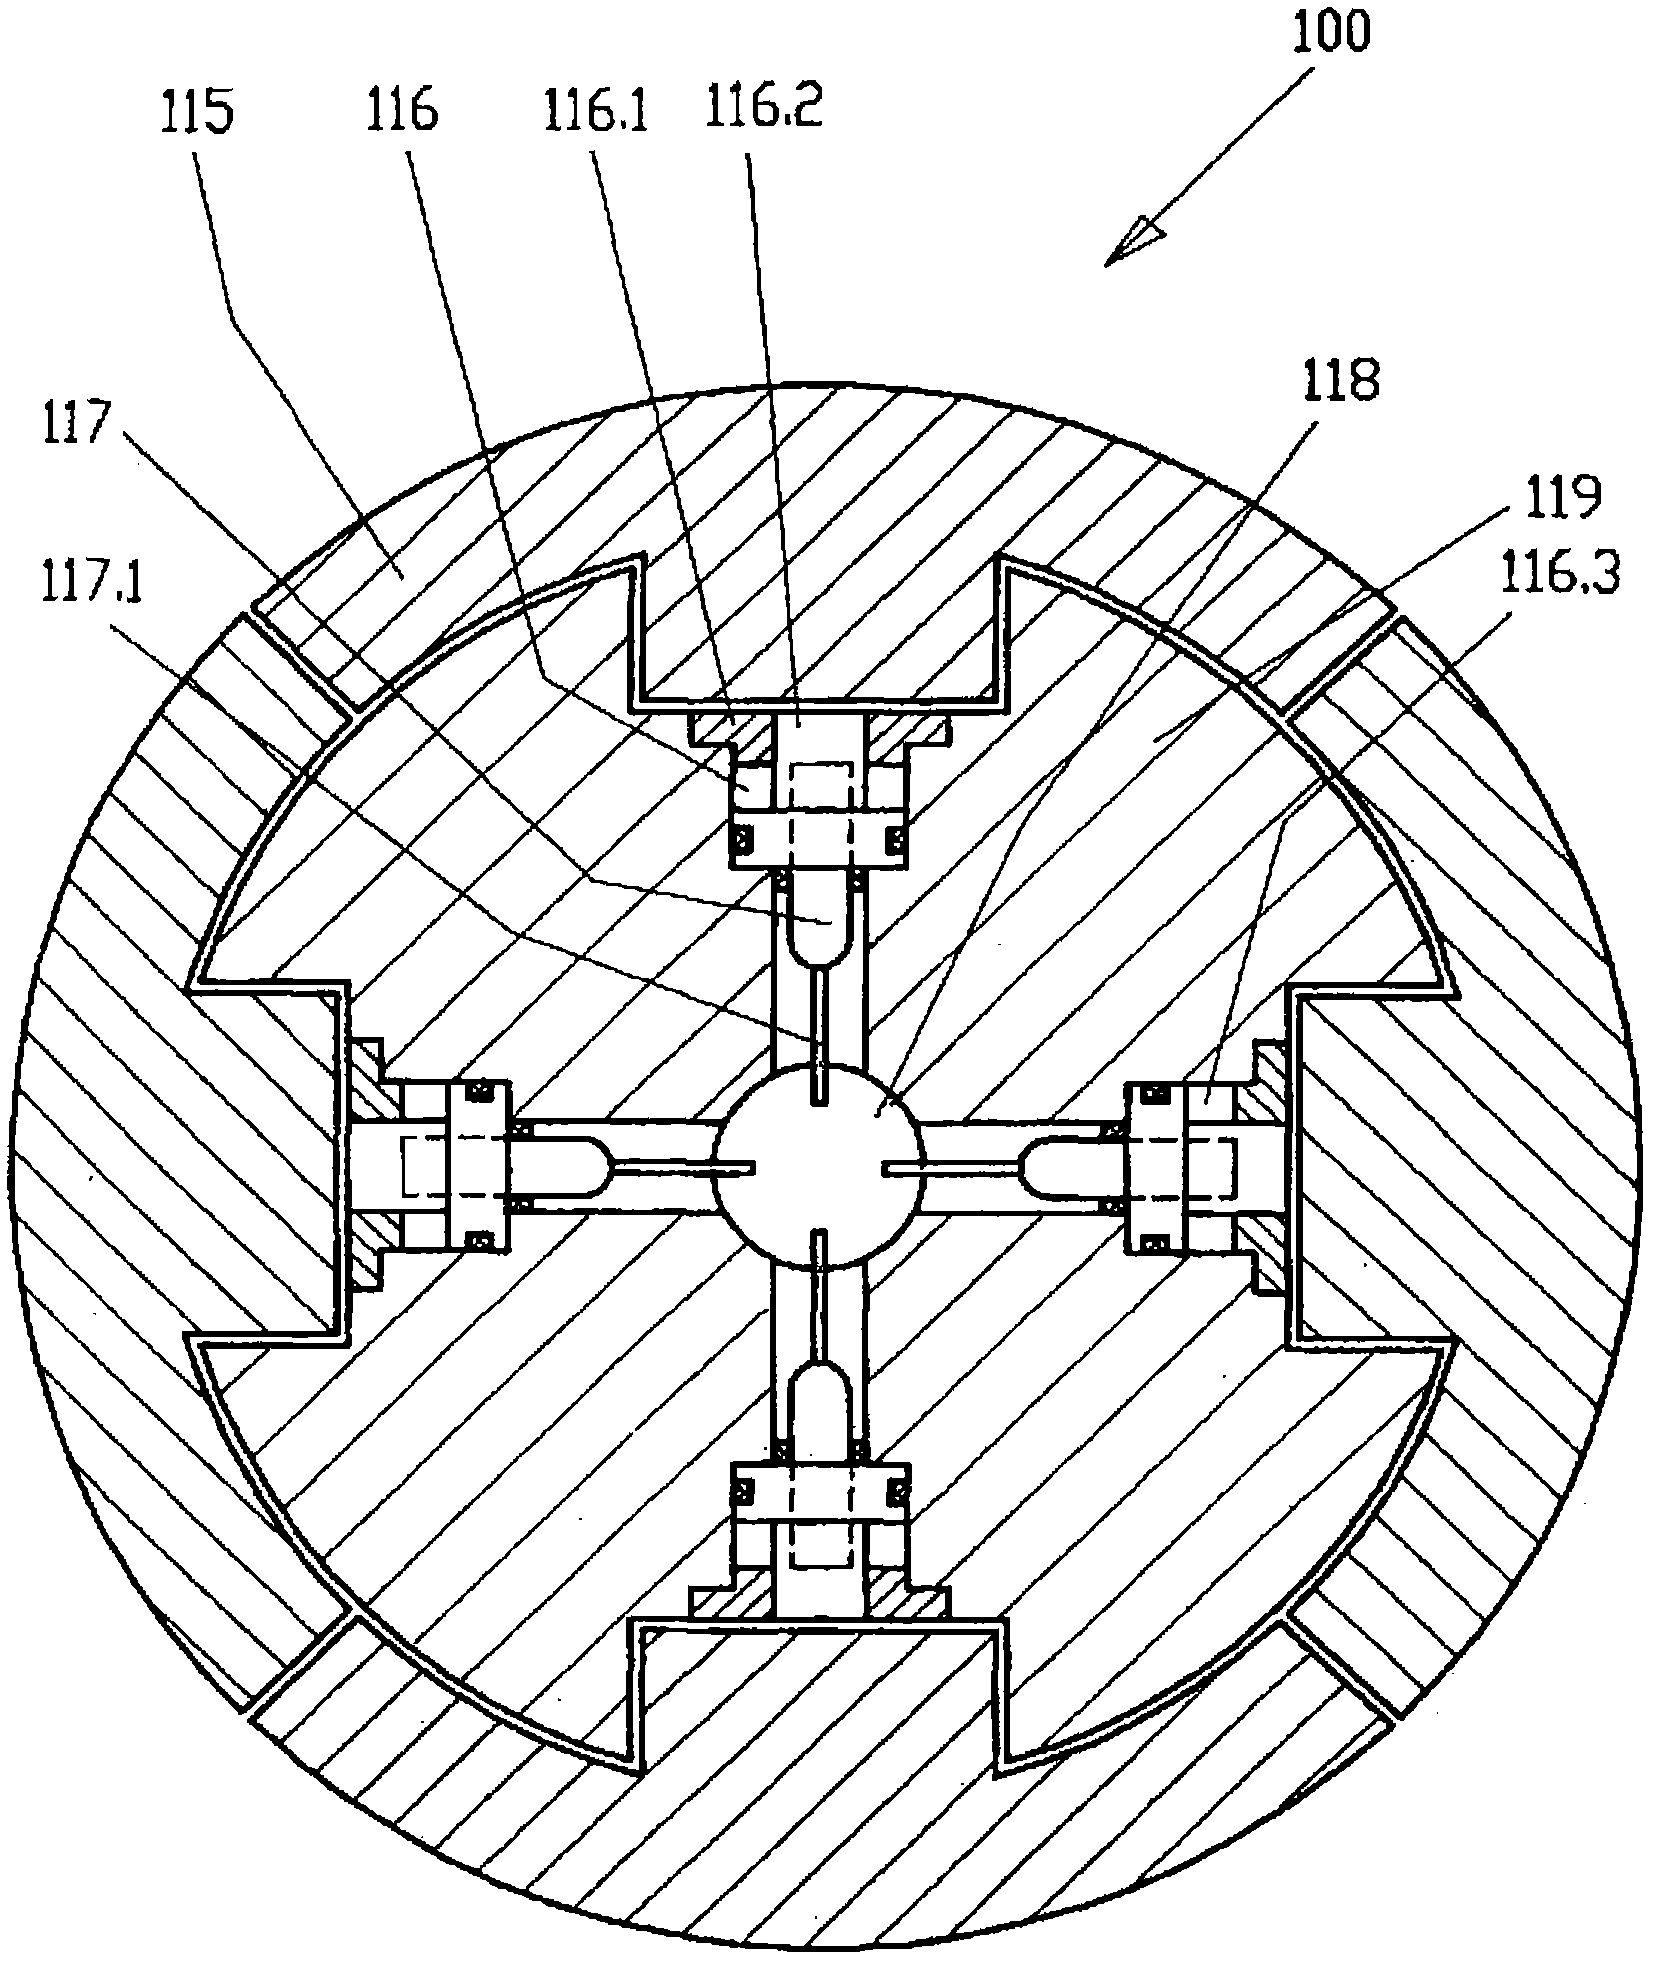 Method and device for winding metal strip material